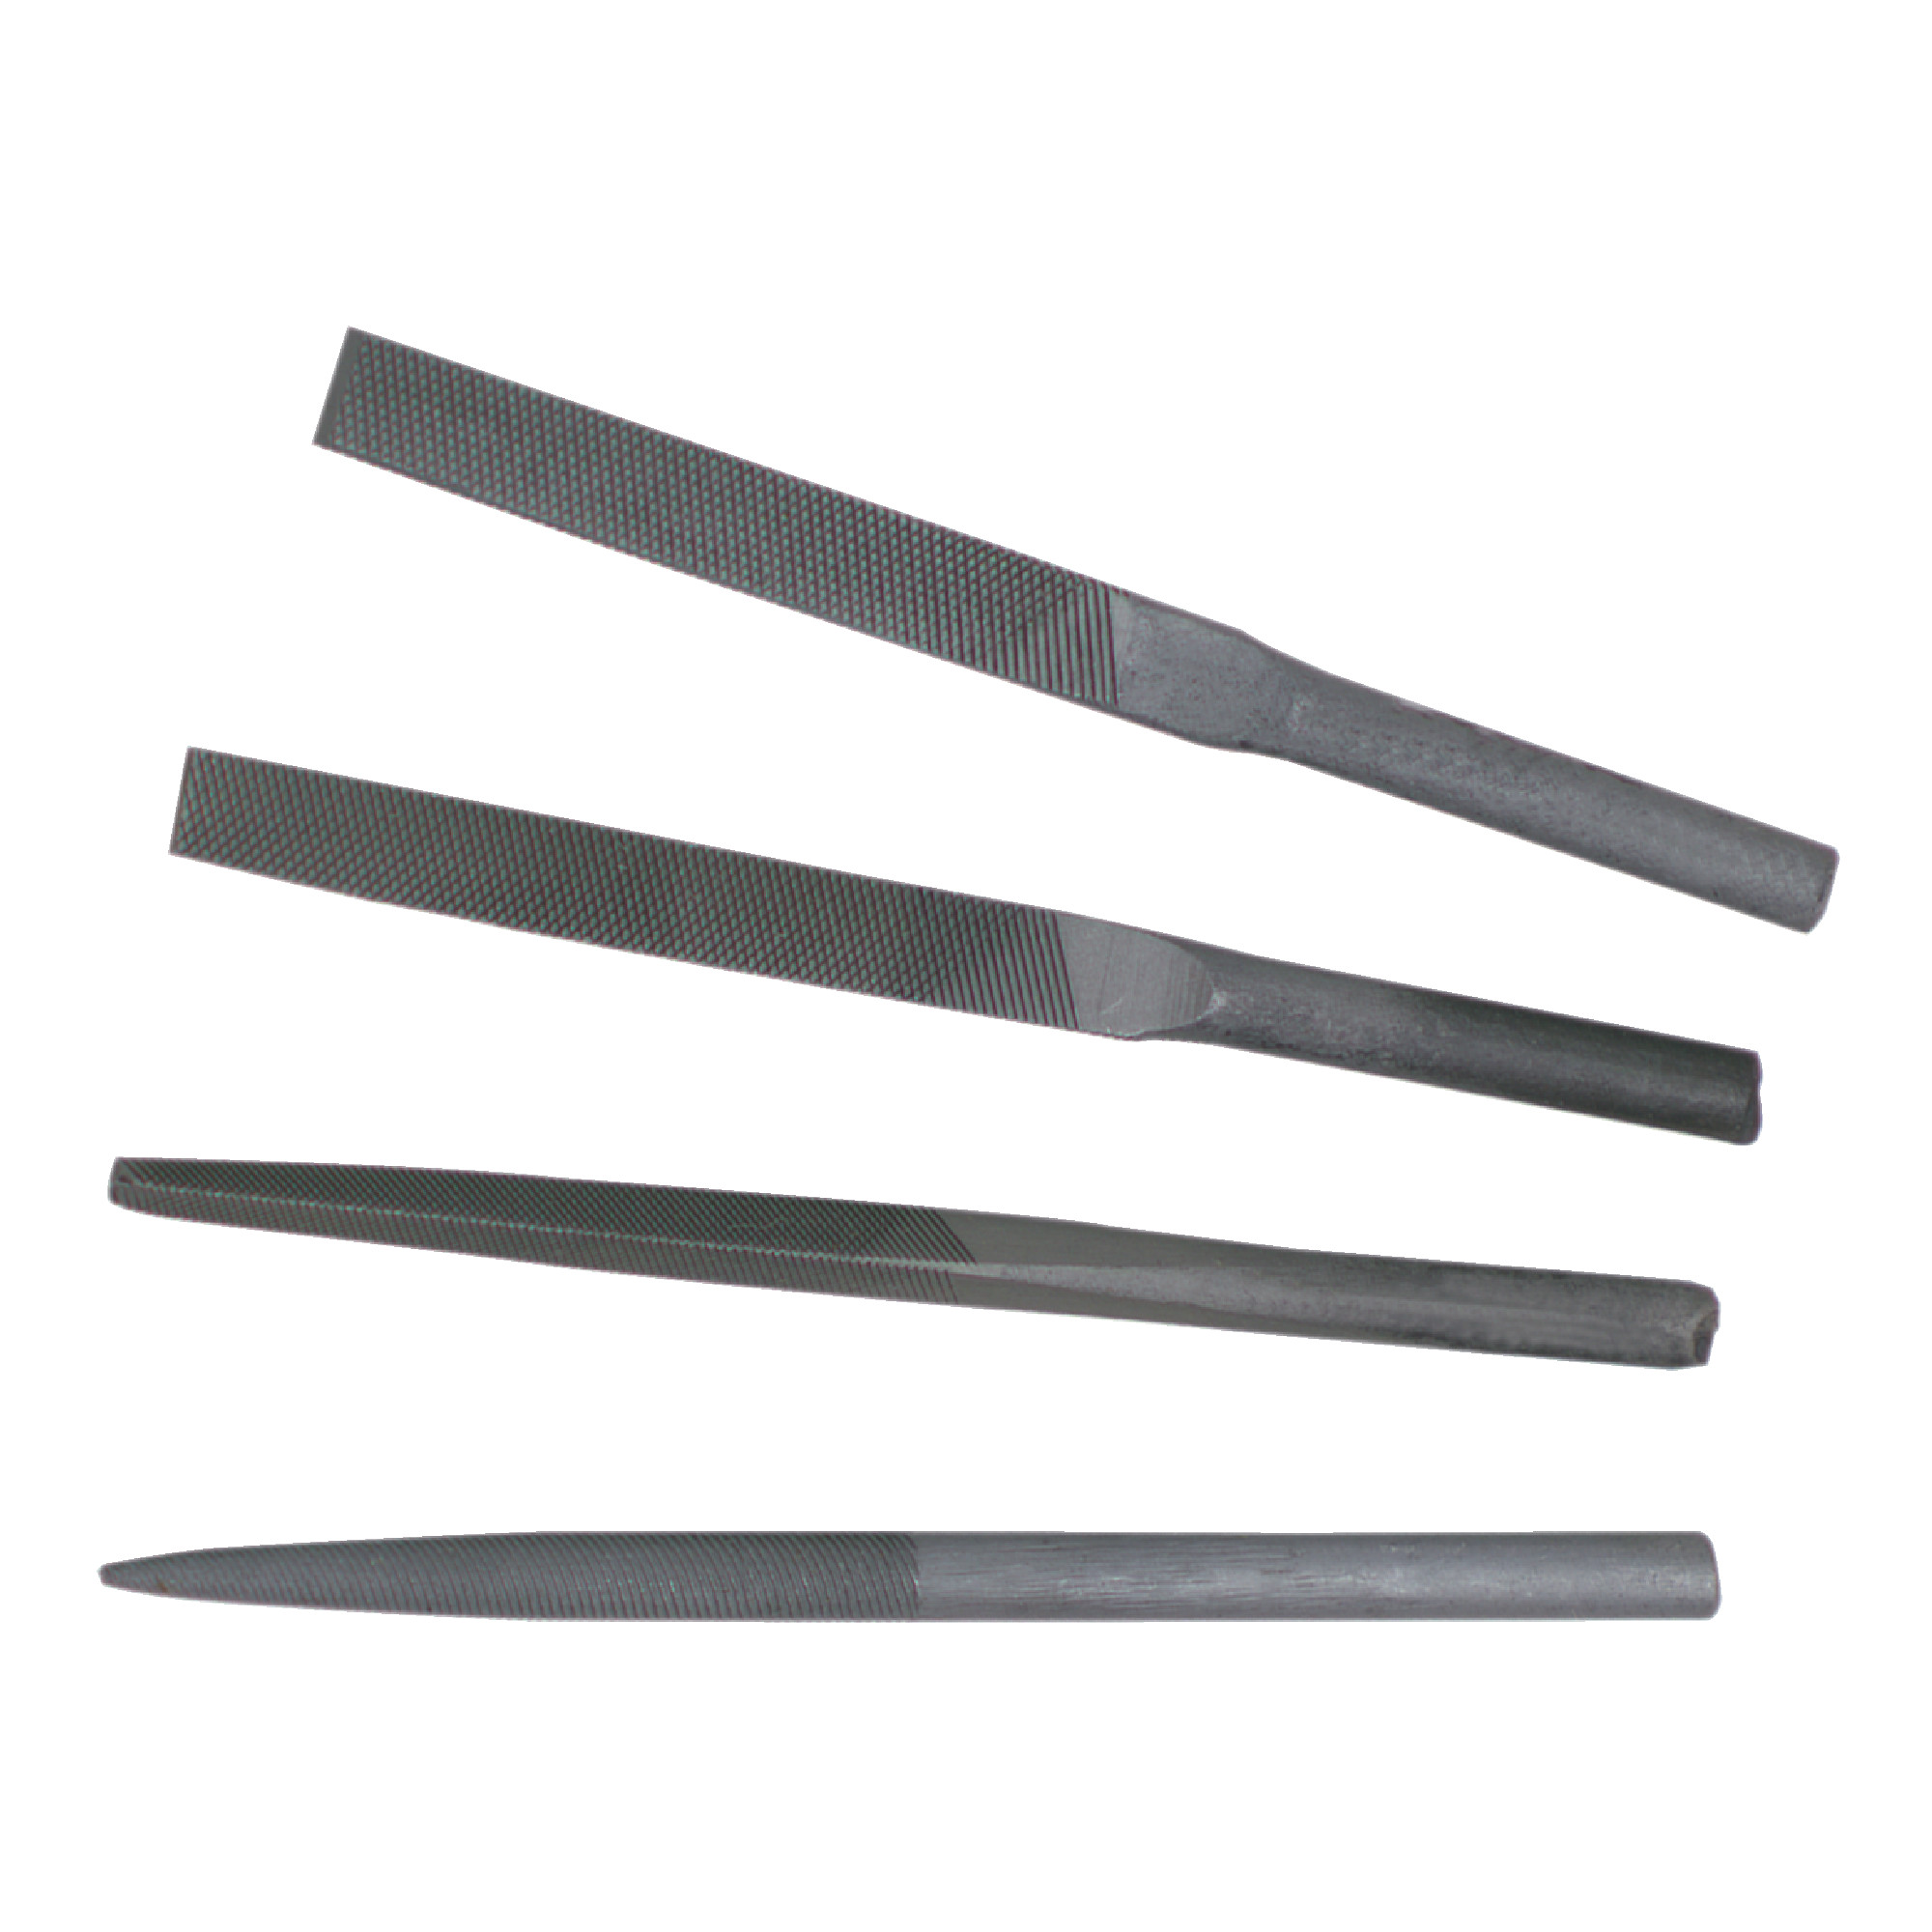 4 Piece Replacement File Set